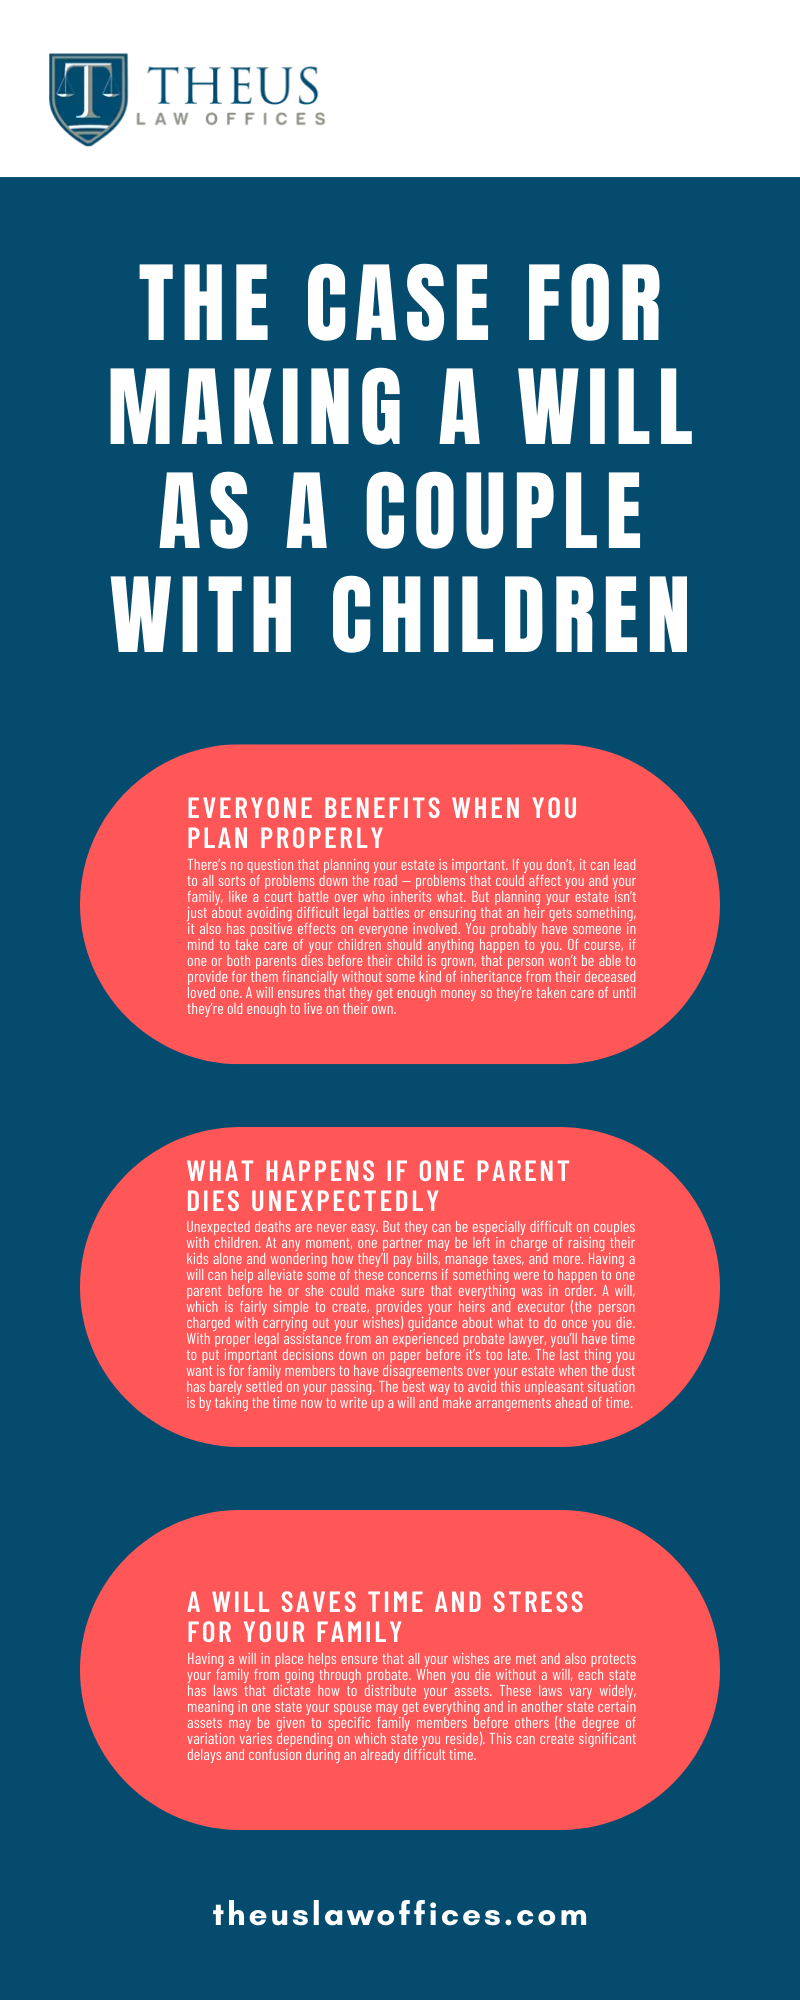 THE CASE FOR MAKING A WILL AS A COUPLE WITH CHILDREN INFOGRAPHIC